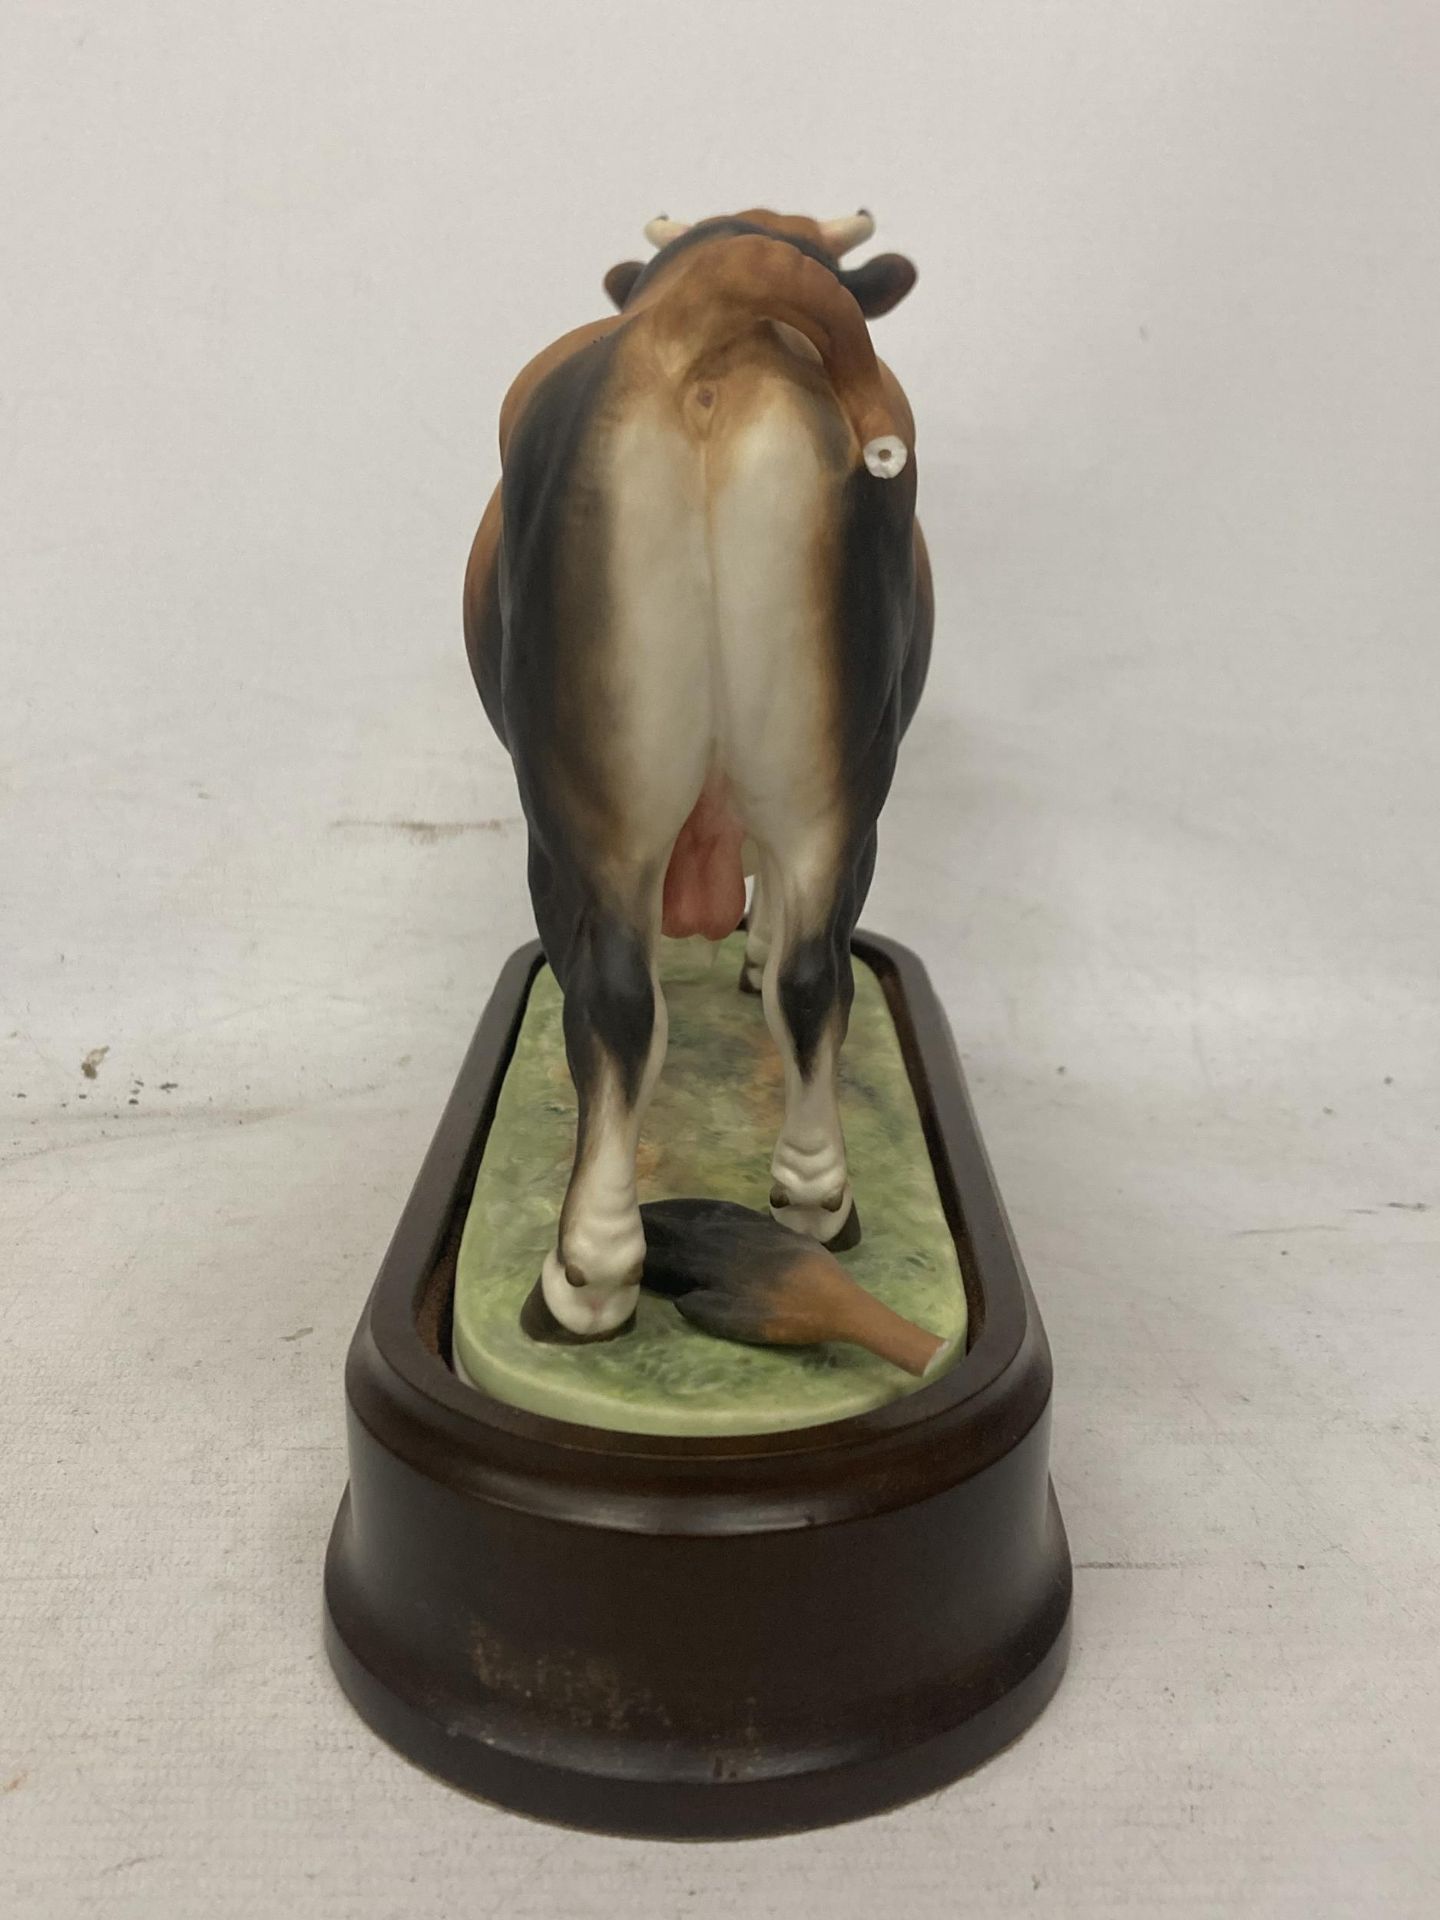 A ROYAL WORCESTER MODEL OF A JERSEY BULL MODELLED BY DORIS LINDNER PRODUCED IN A LIMITED EDITION - Image 4 of 5